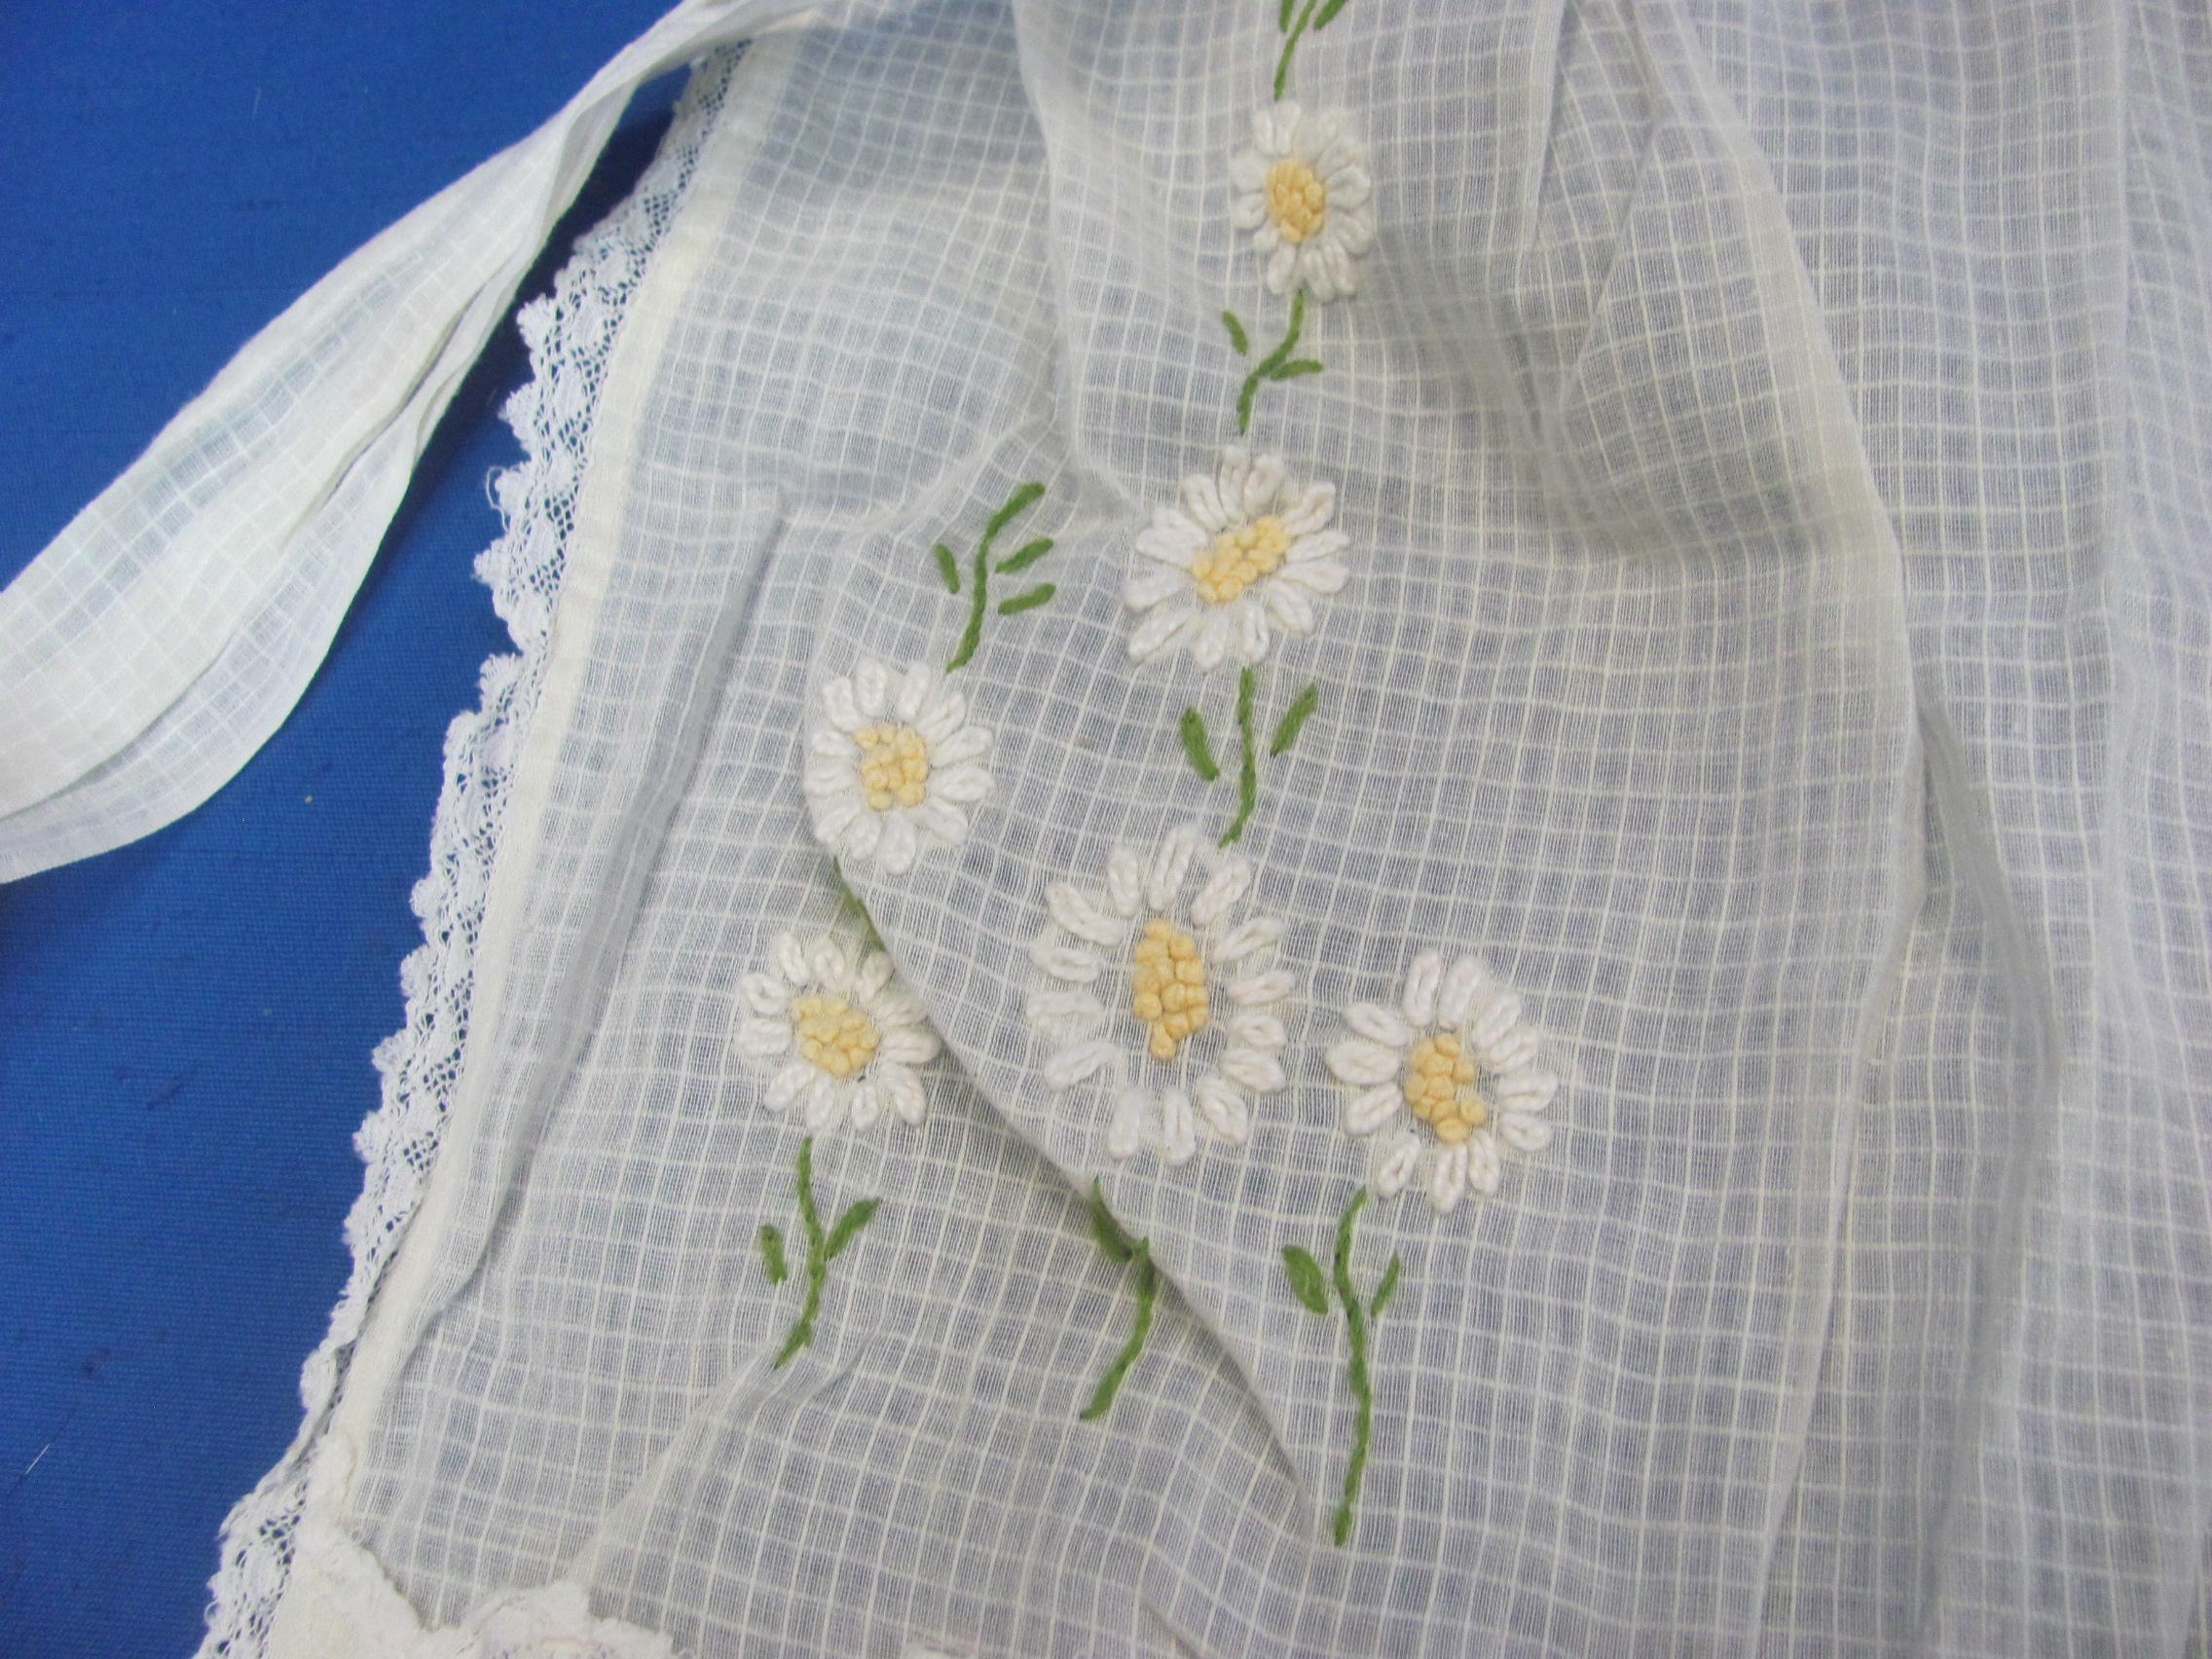 12 Vintage Half Aprons: Sheer – Crocheted – Gingham & more – 1 with Tiny Bible Charm